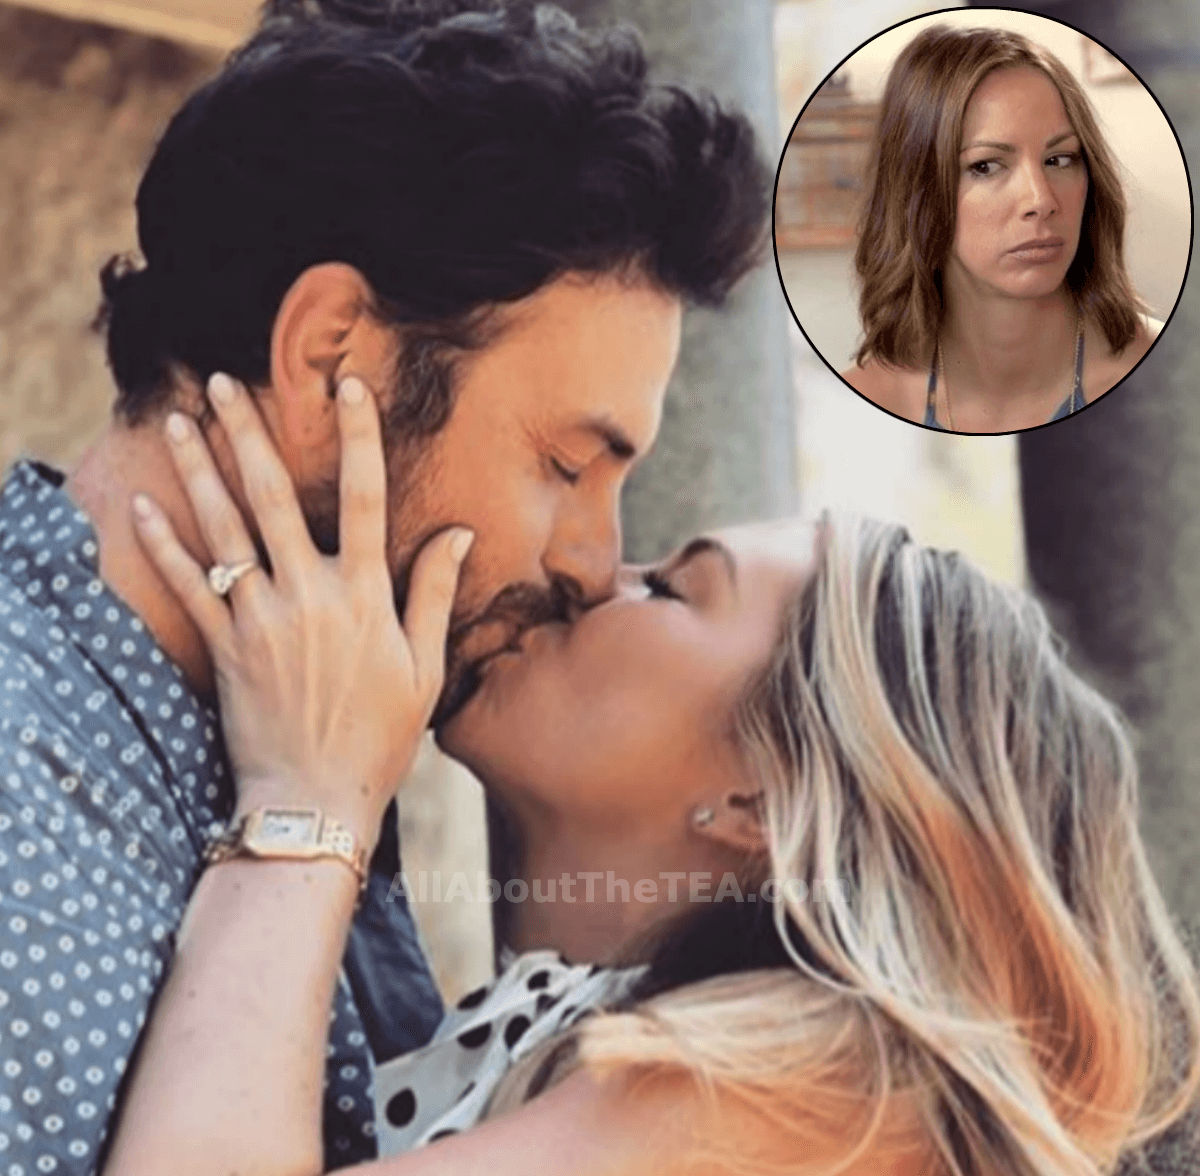 Stassi Schroeder and Beau Clark Celebrate Engagement With ‘Vanderpump Rules’ Cast Except Kristen Doute Sparking Feud Rumors! 